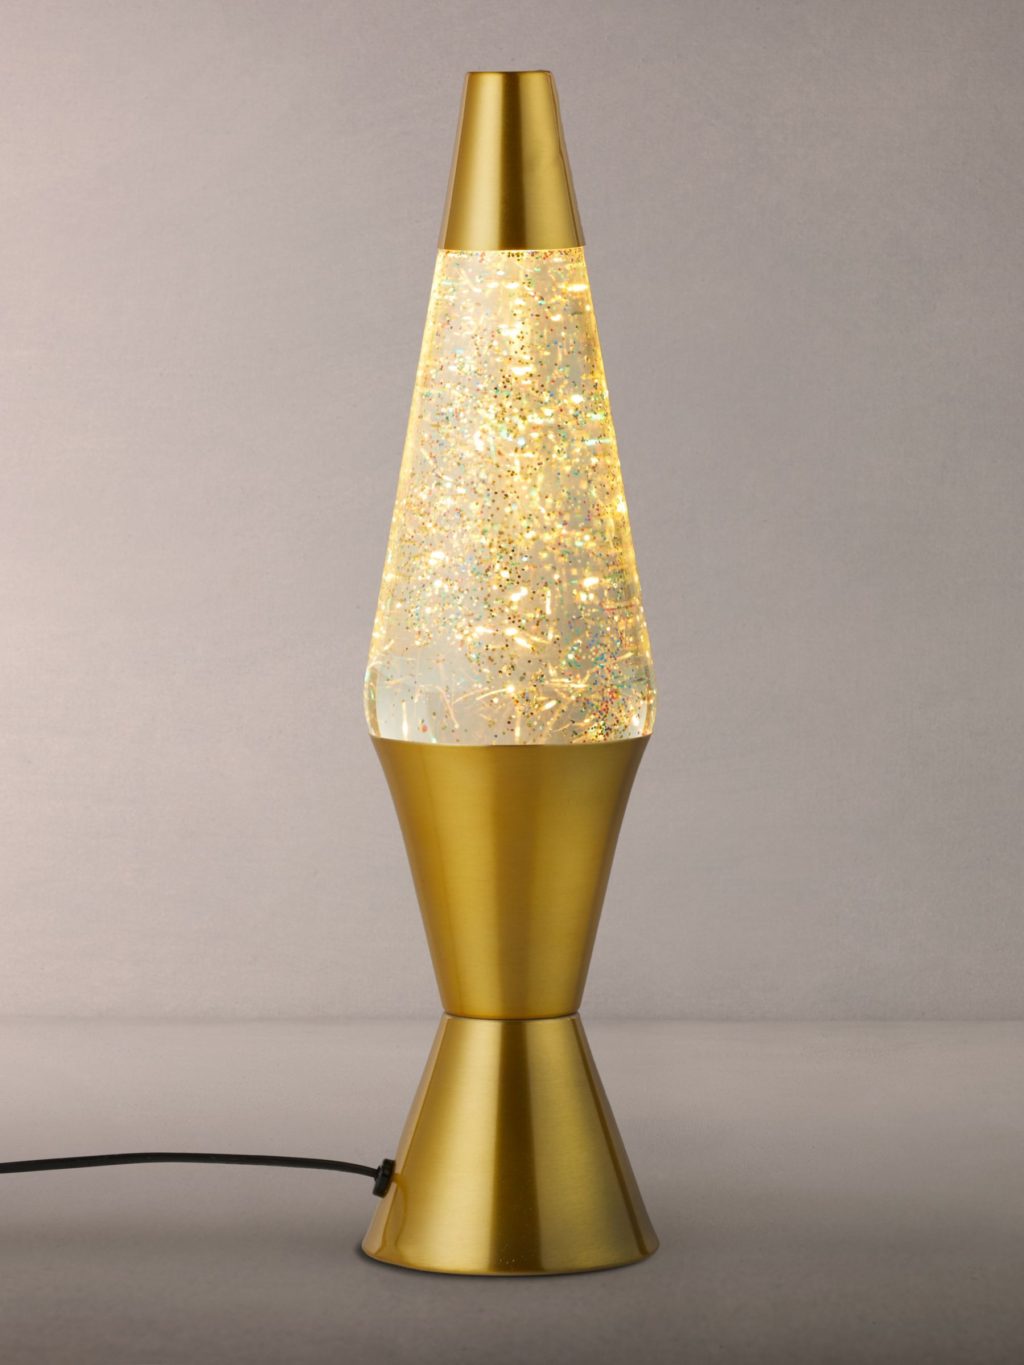 Gold base lava lamp. 10 Unique Lava Lamps Ideas and Complete Guide Before Buying - 17